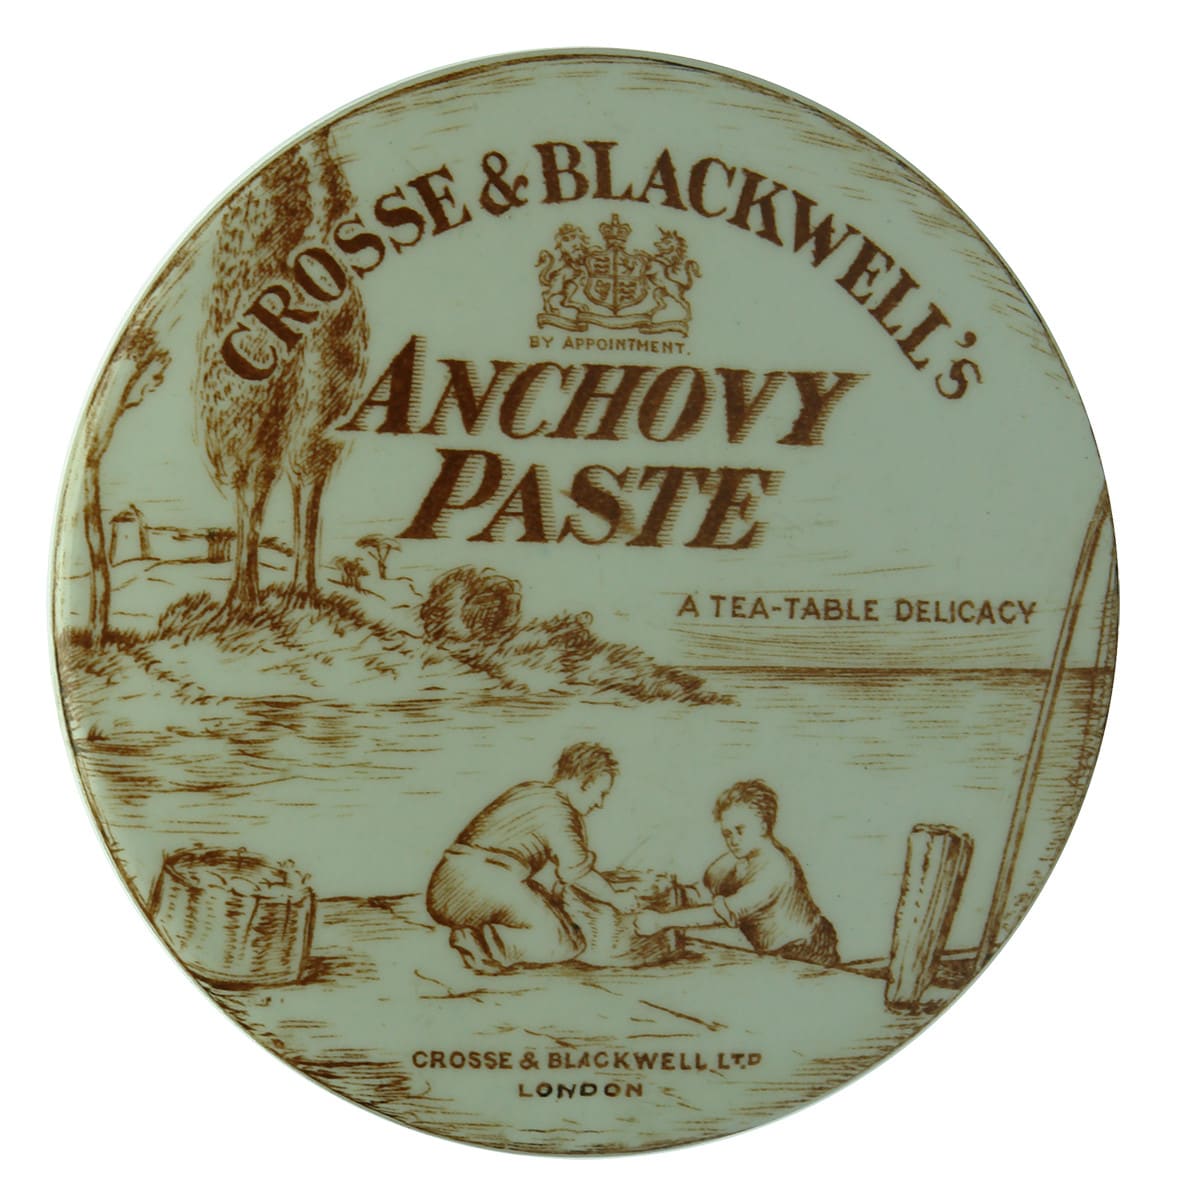 Pot Lid. Crosse & Blackwell's Anchovy Paste. Sepia Print. (United Kingdom)